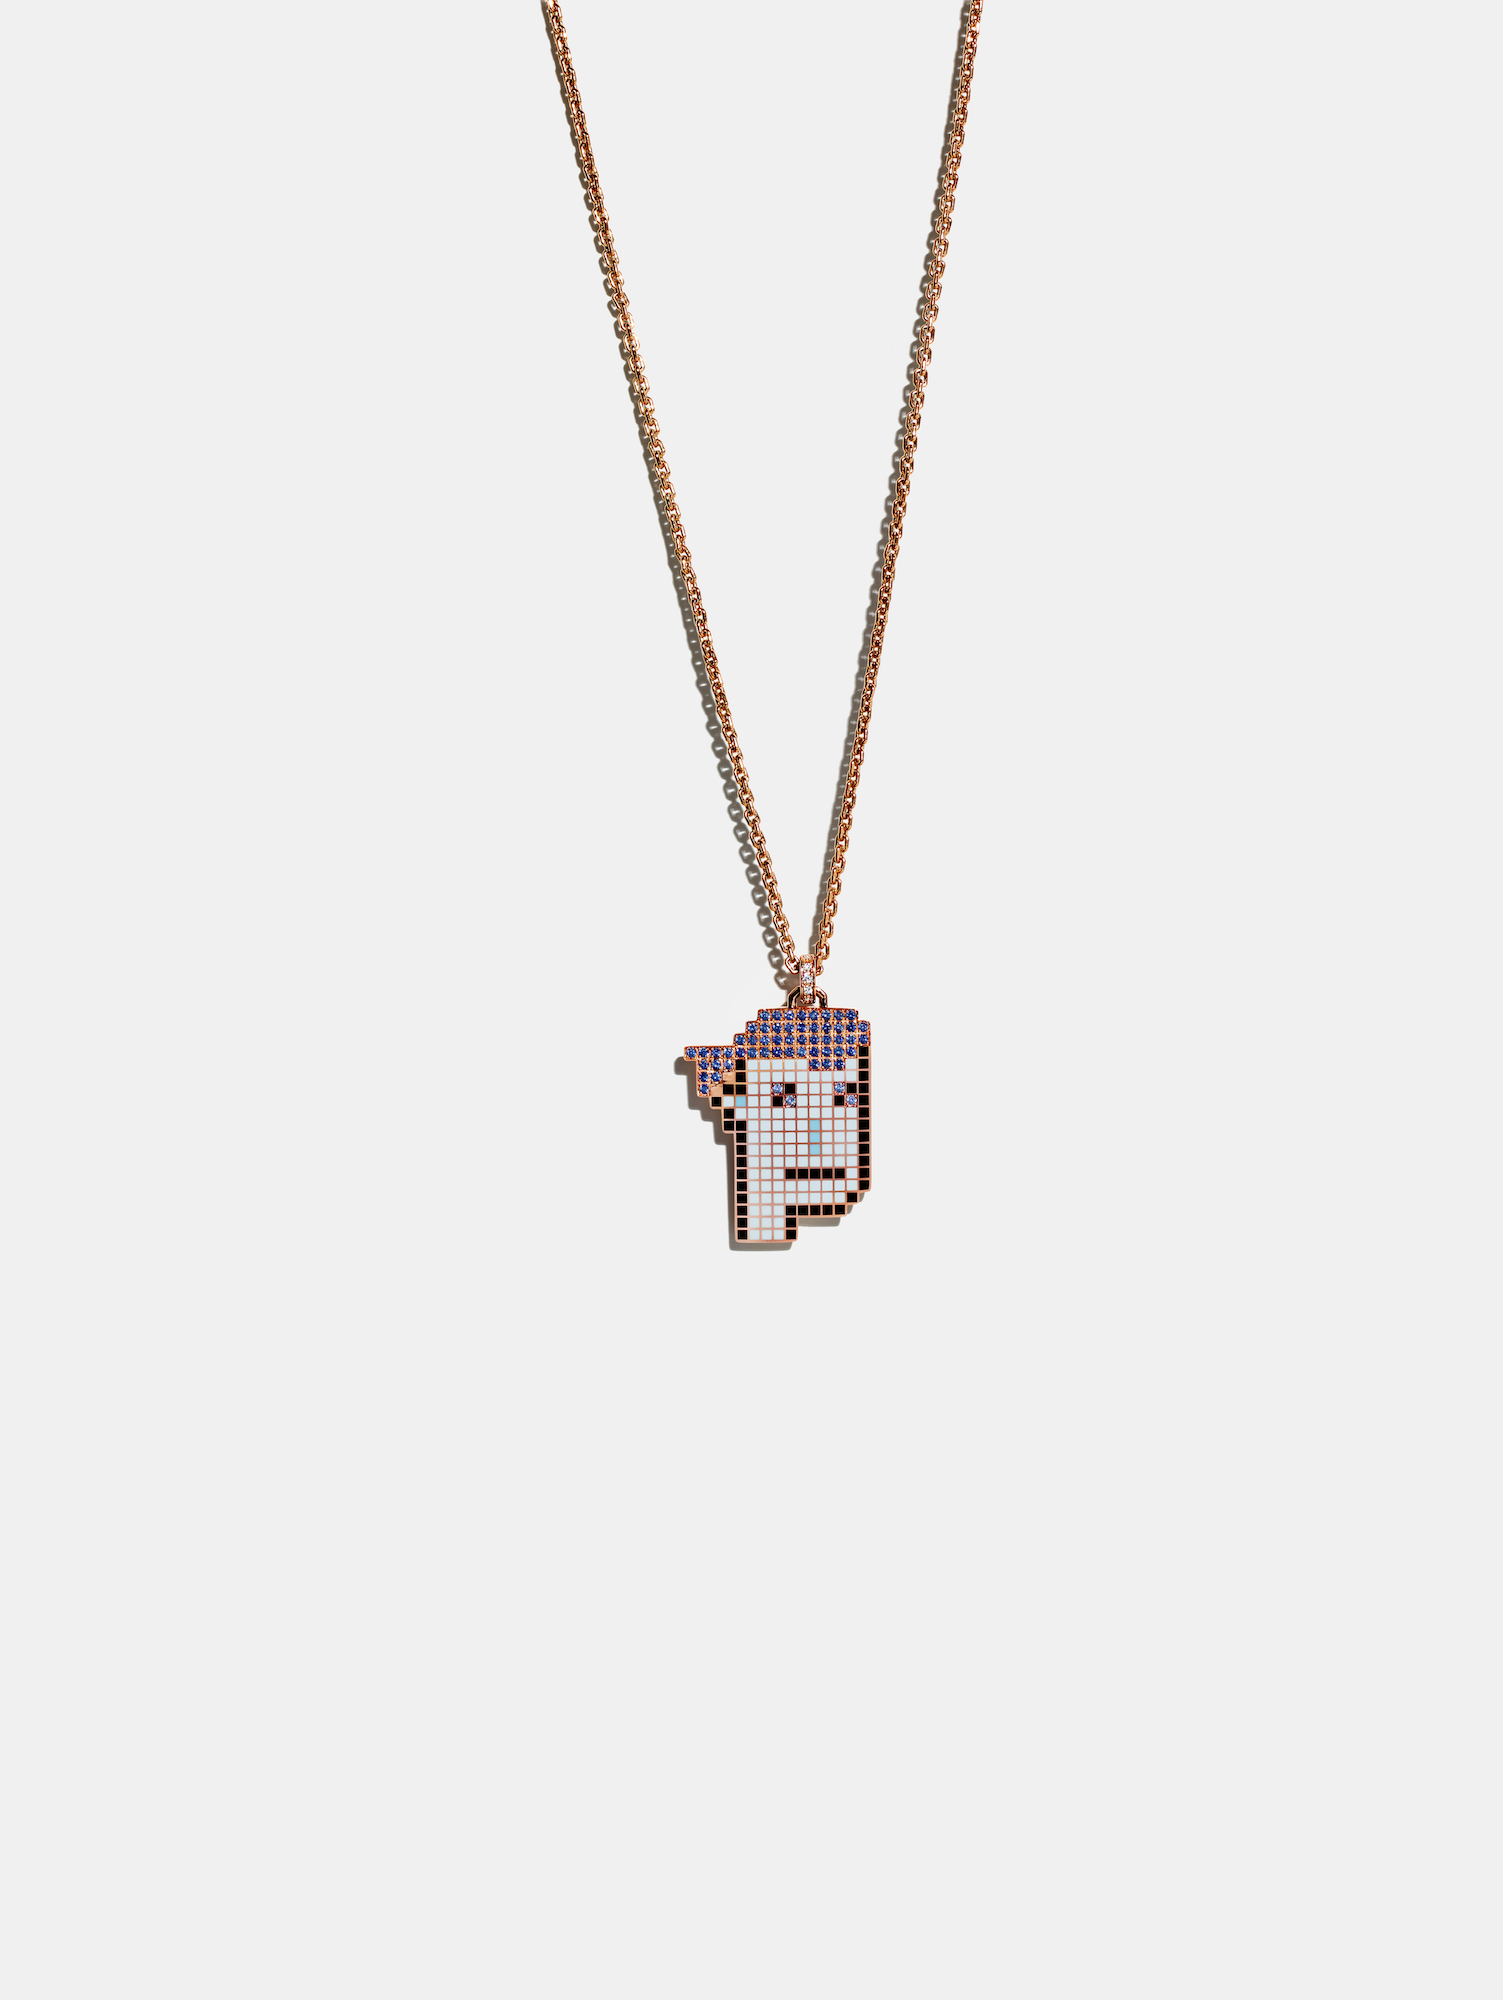  The CryptoPunk necklace.